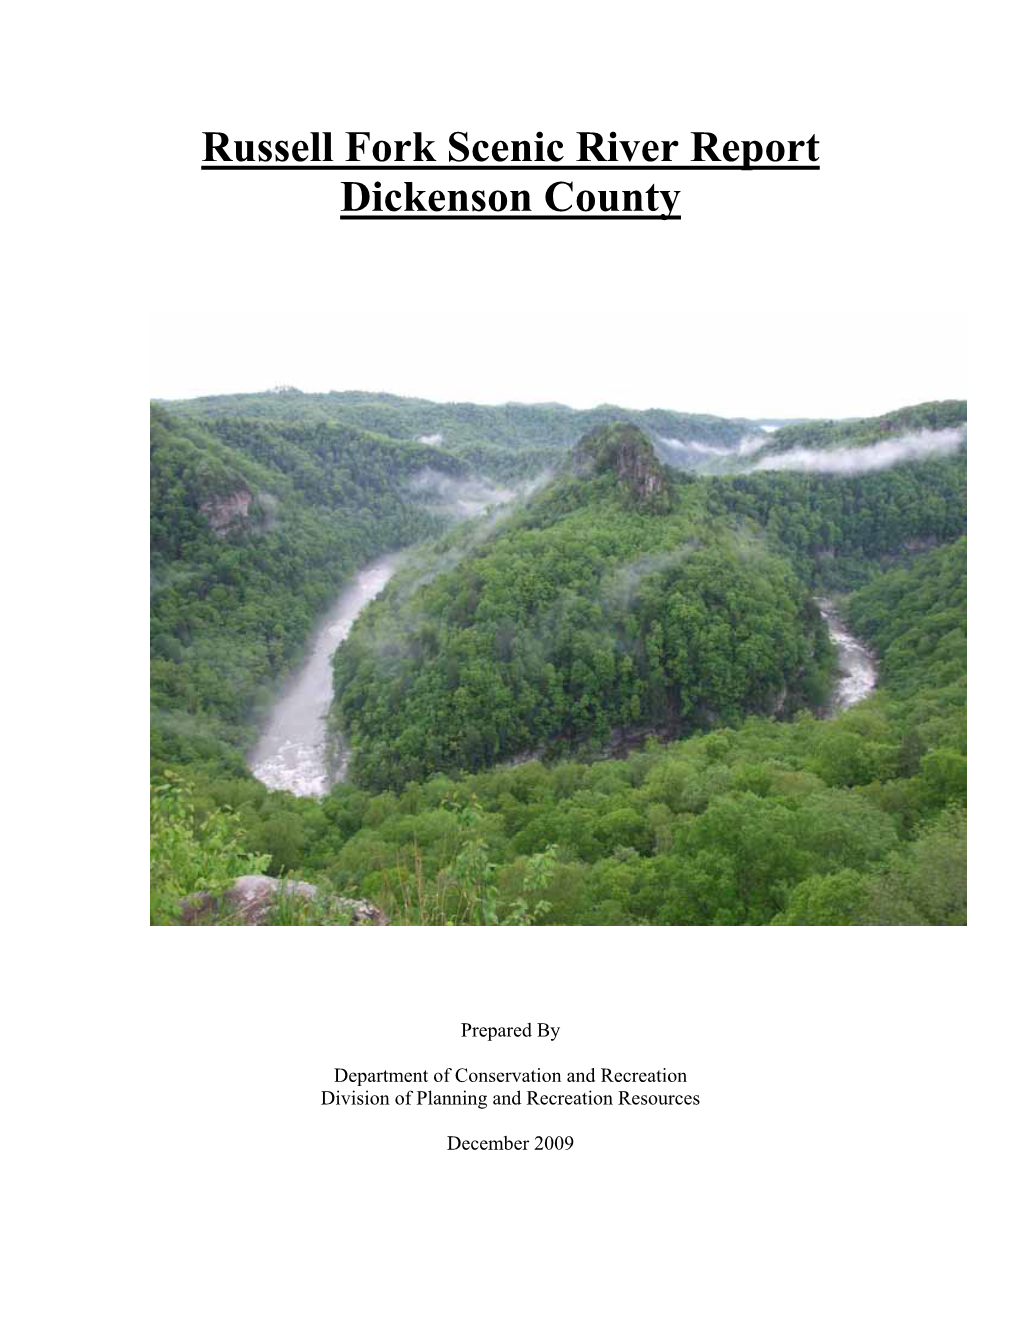 Russell Fork River Report: Dickenson County